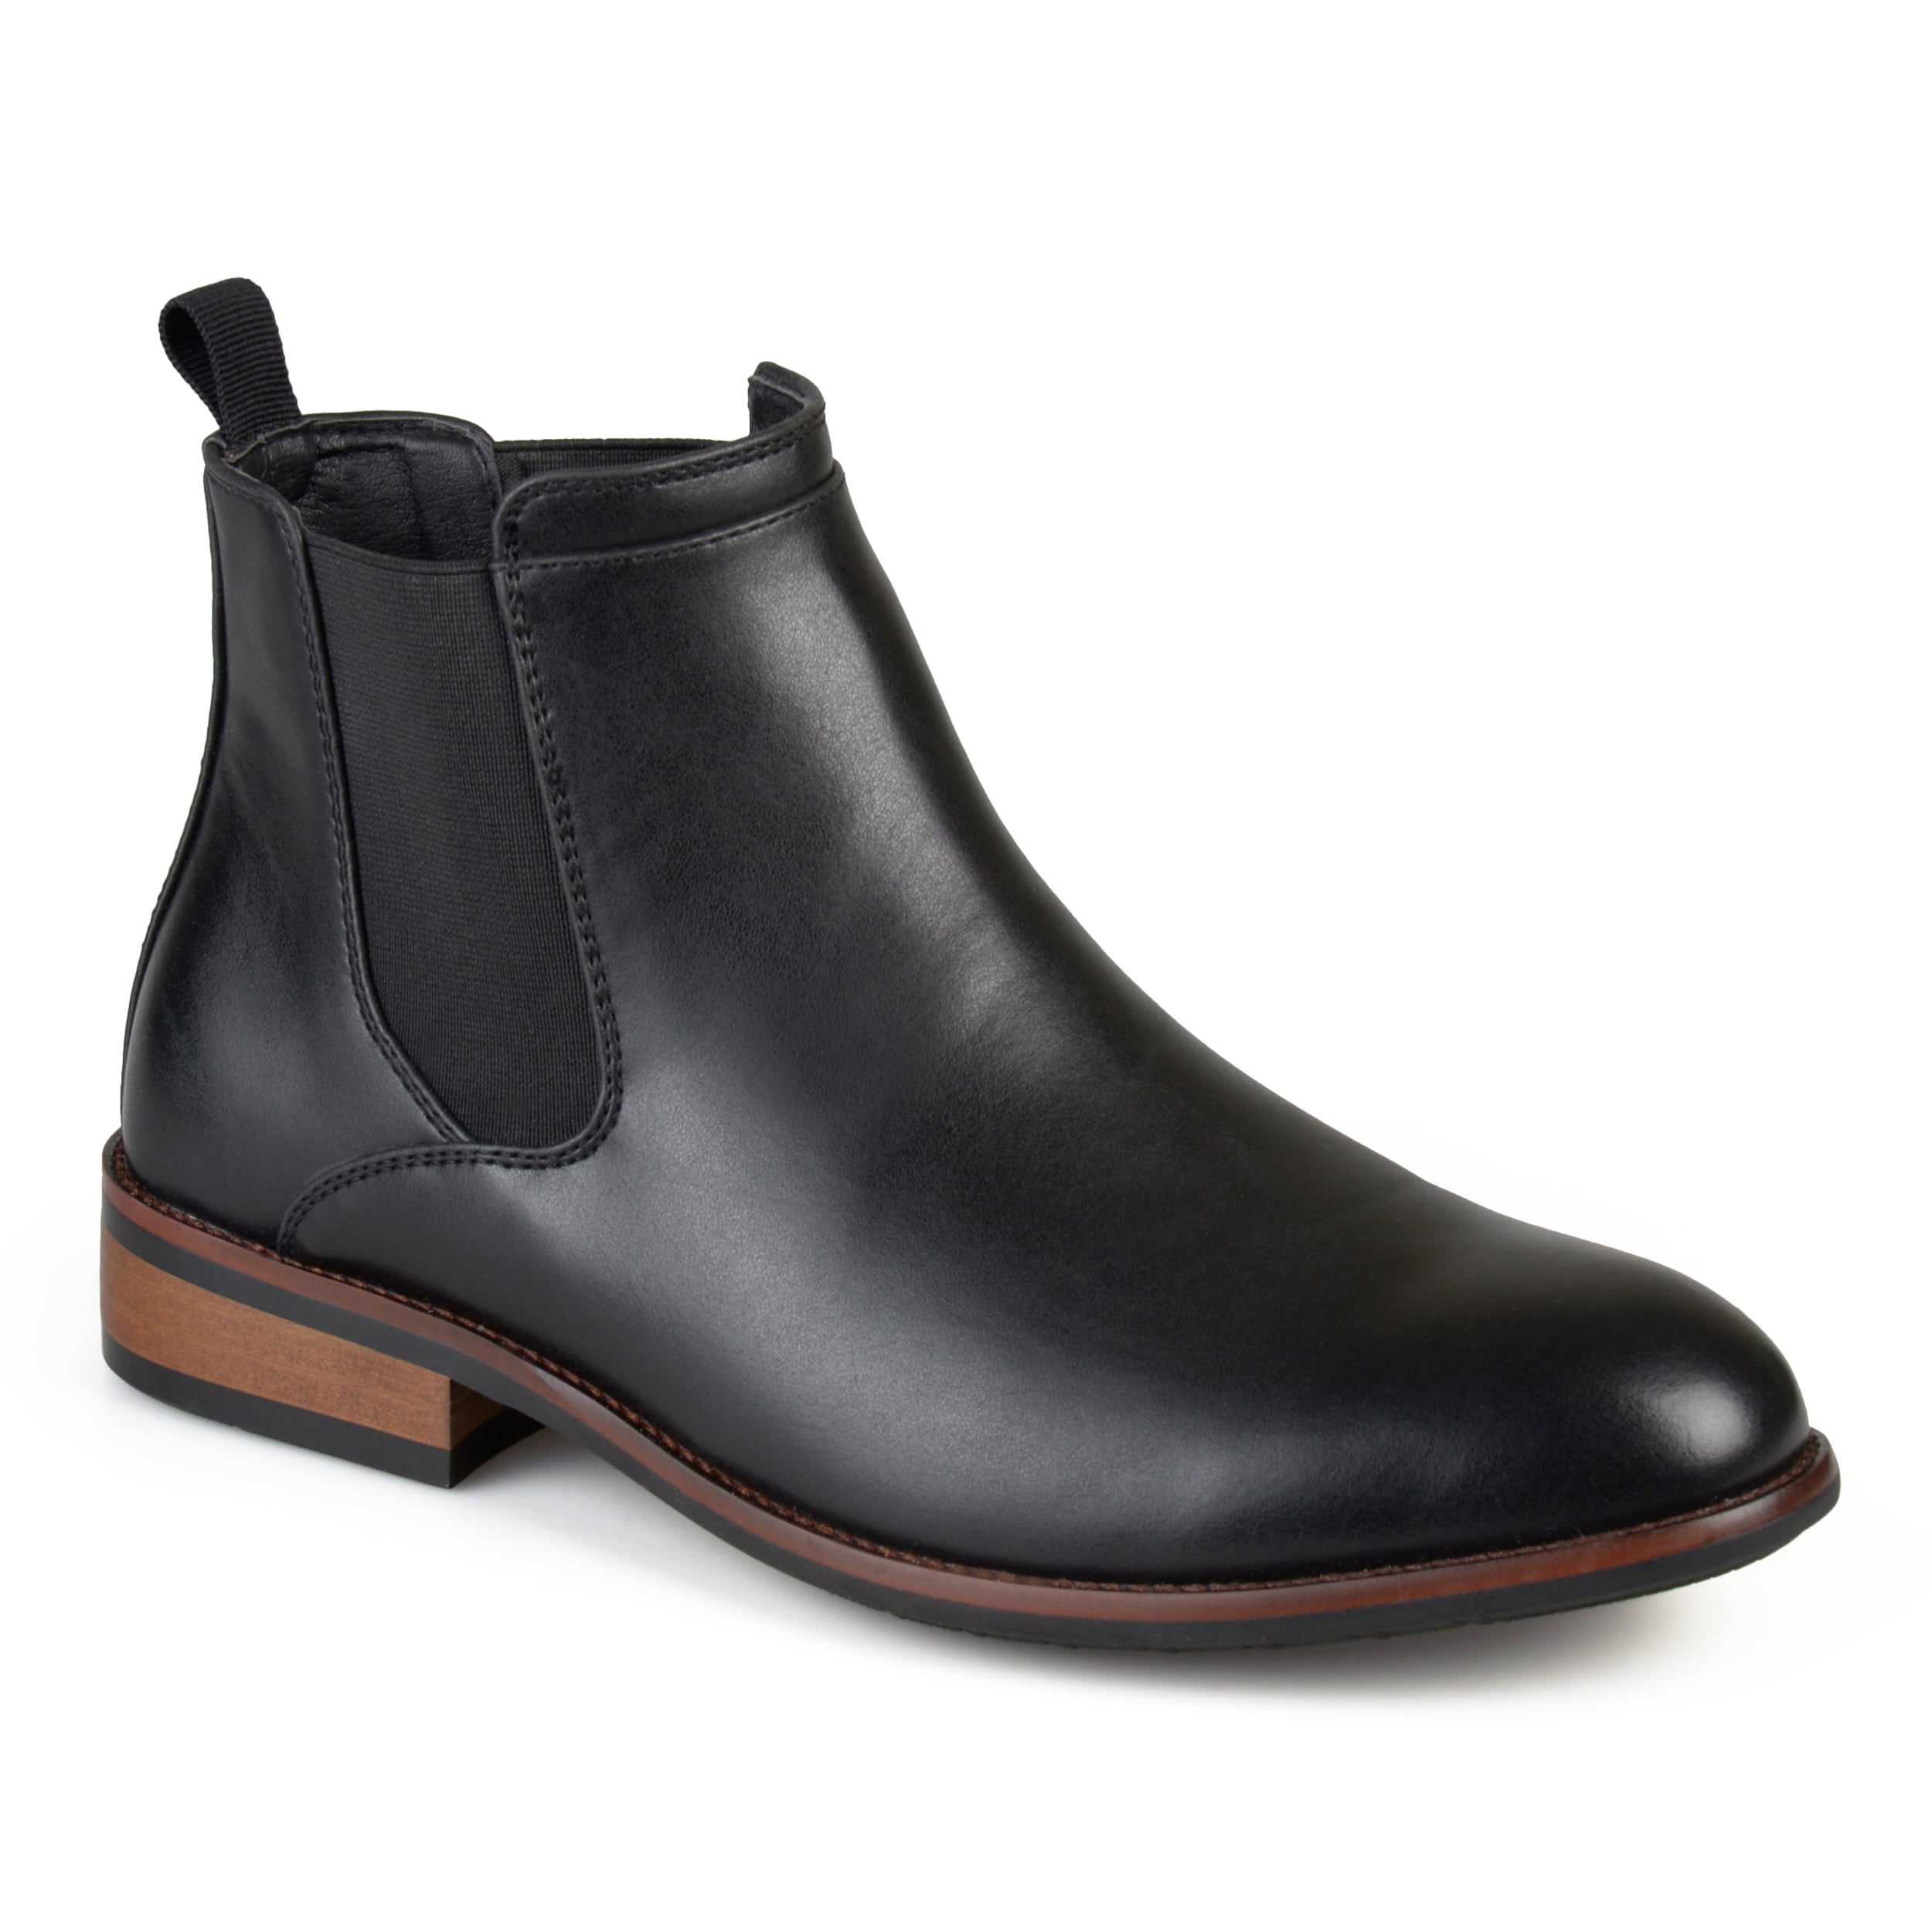 mens dress boots on sale